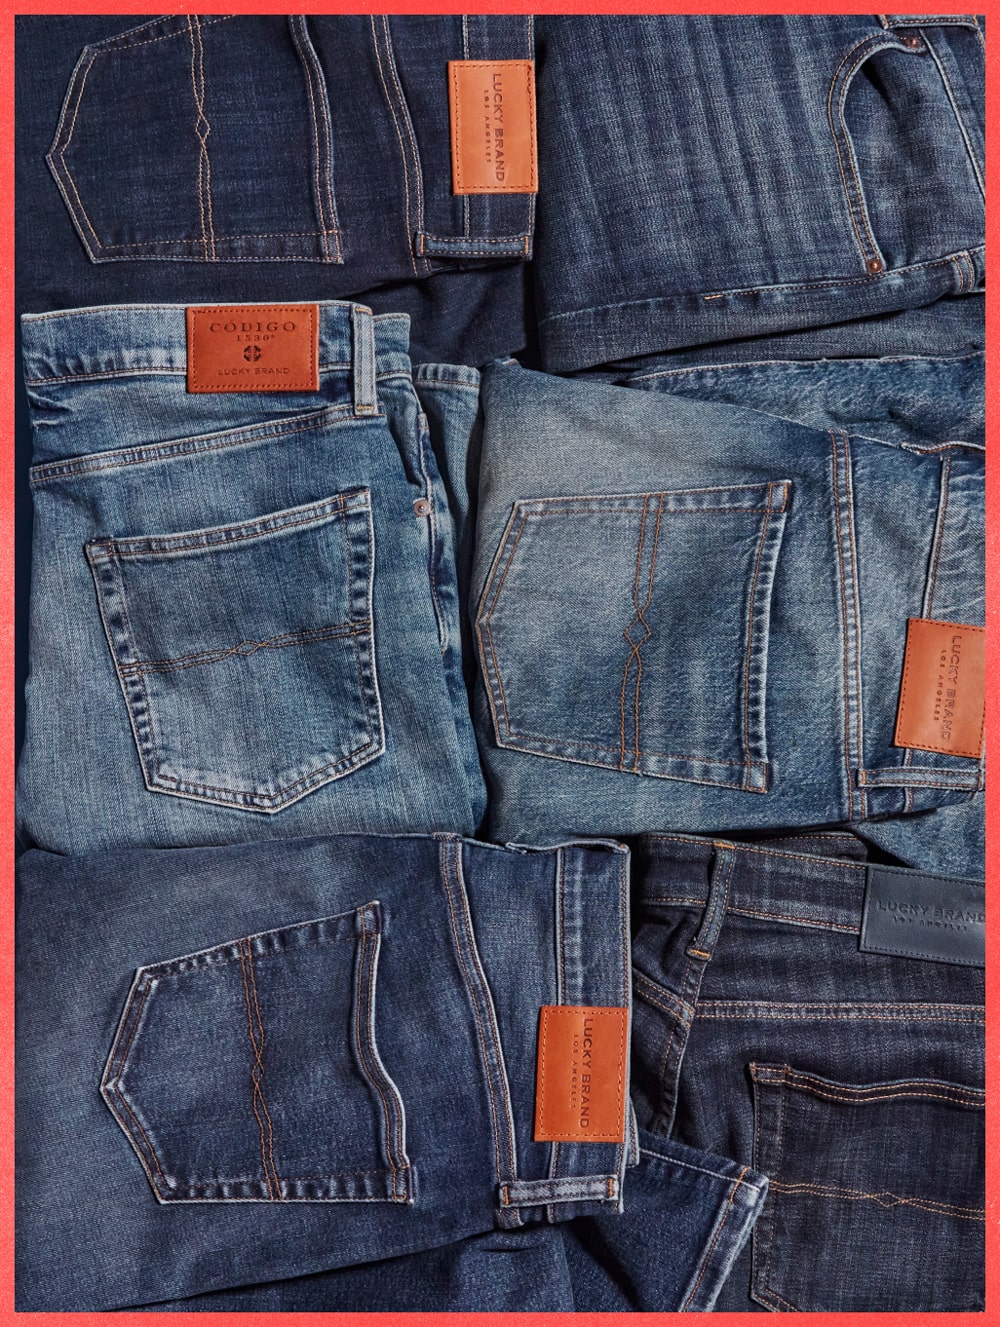 Lucky Brand Jeans, Clothing & Accessories for Men & Women | Lucky Brand